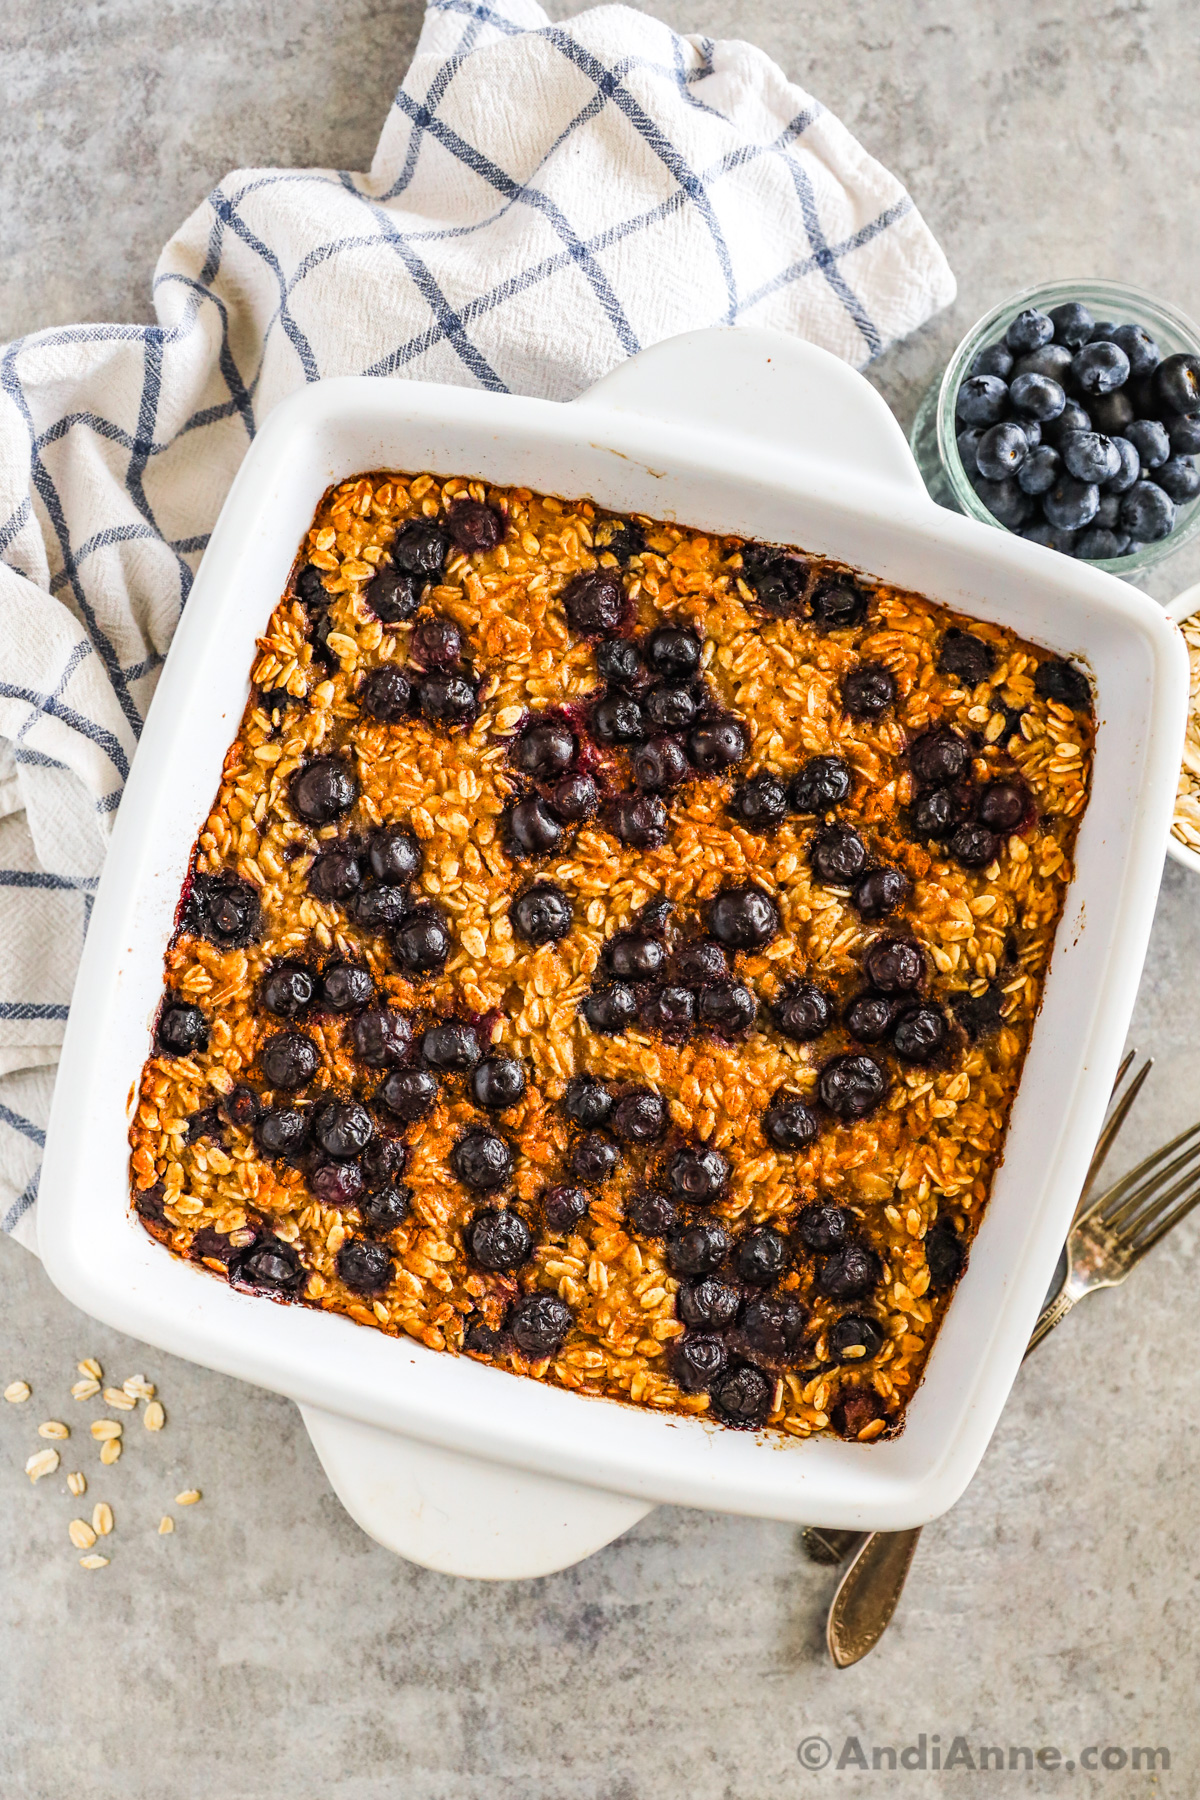 A square dish of blueberry baked oatmeal with kitchen towel, forks, and small bowl of fresh blueberries surrounding it.